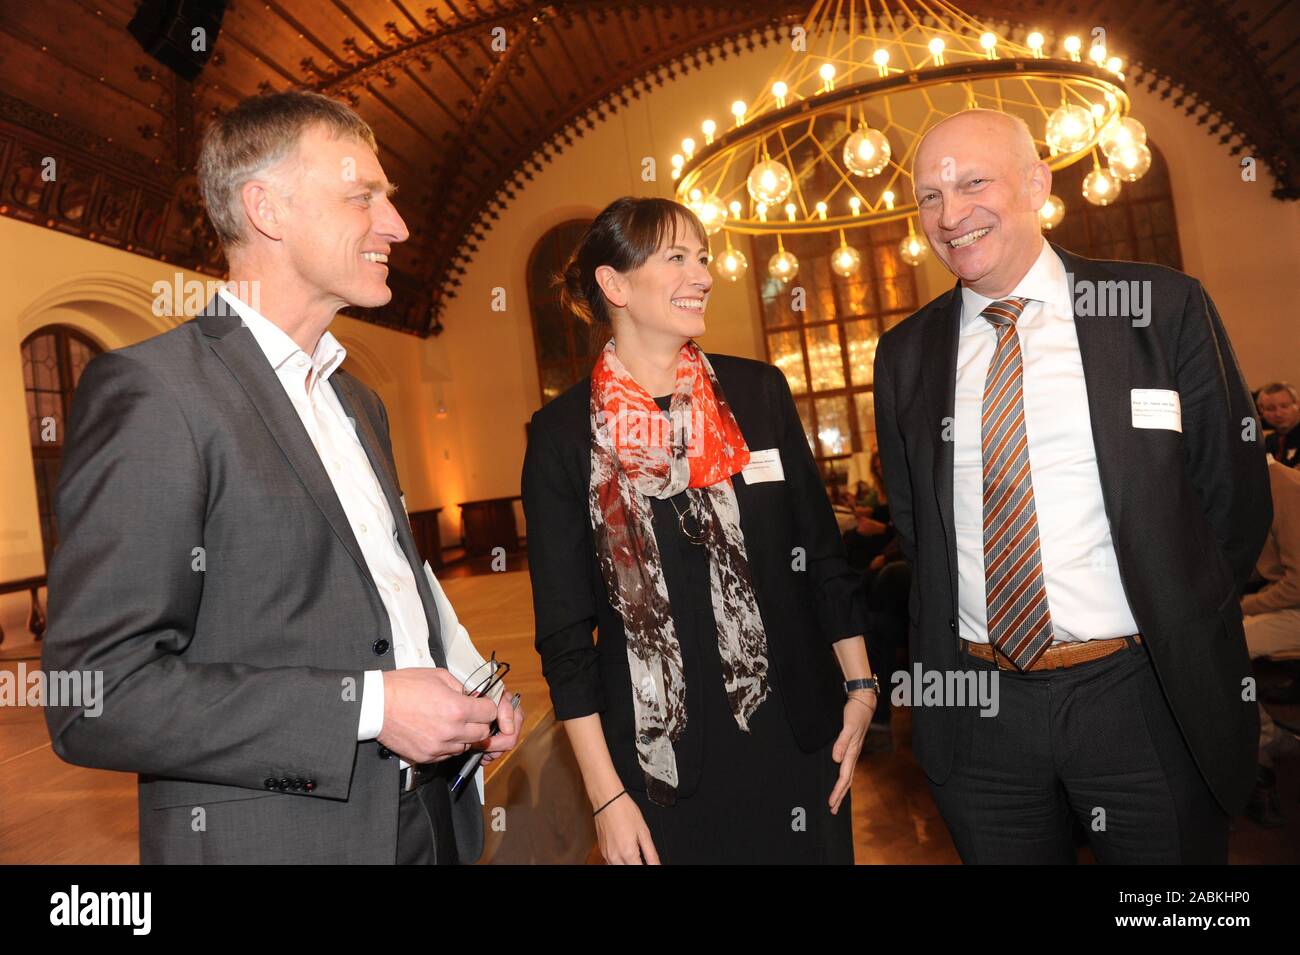 Reception of the City of Munich for 'International Guest Researchers' in the hall of the Old Town Hall. In the picture (from left to right) host Kurt Kapp, acting head of the economic department in conversation with the Spaniard Dr. Celia Martinez-Jimenez from the Helmholtz Centre and Prof. Dr. Hans van Ess, Vice President of the Ludwig-Maximilians-University (LMU). [automated translation] Stock Photo